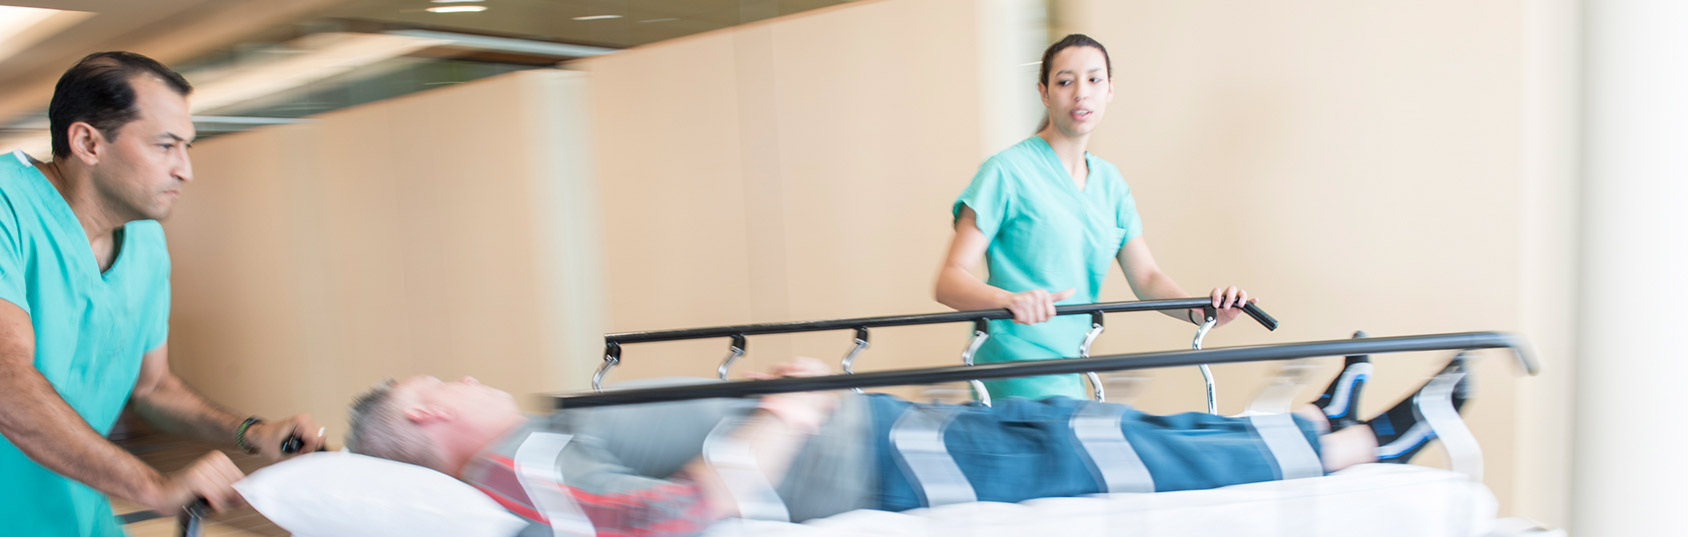 Two health professionals rushing a gurney into the ICU